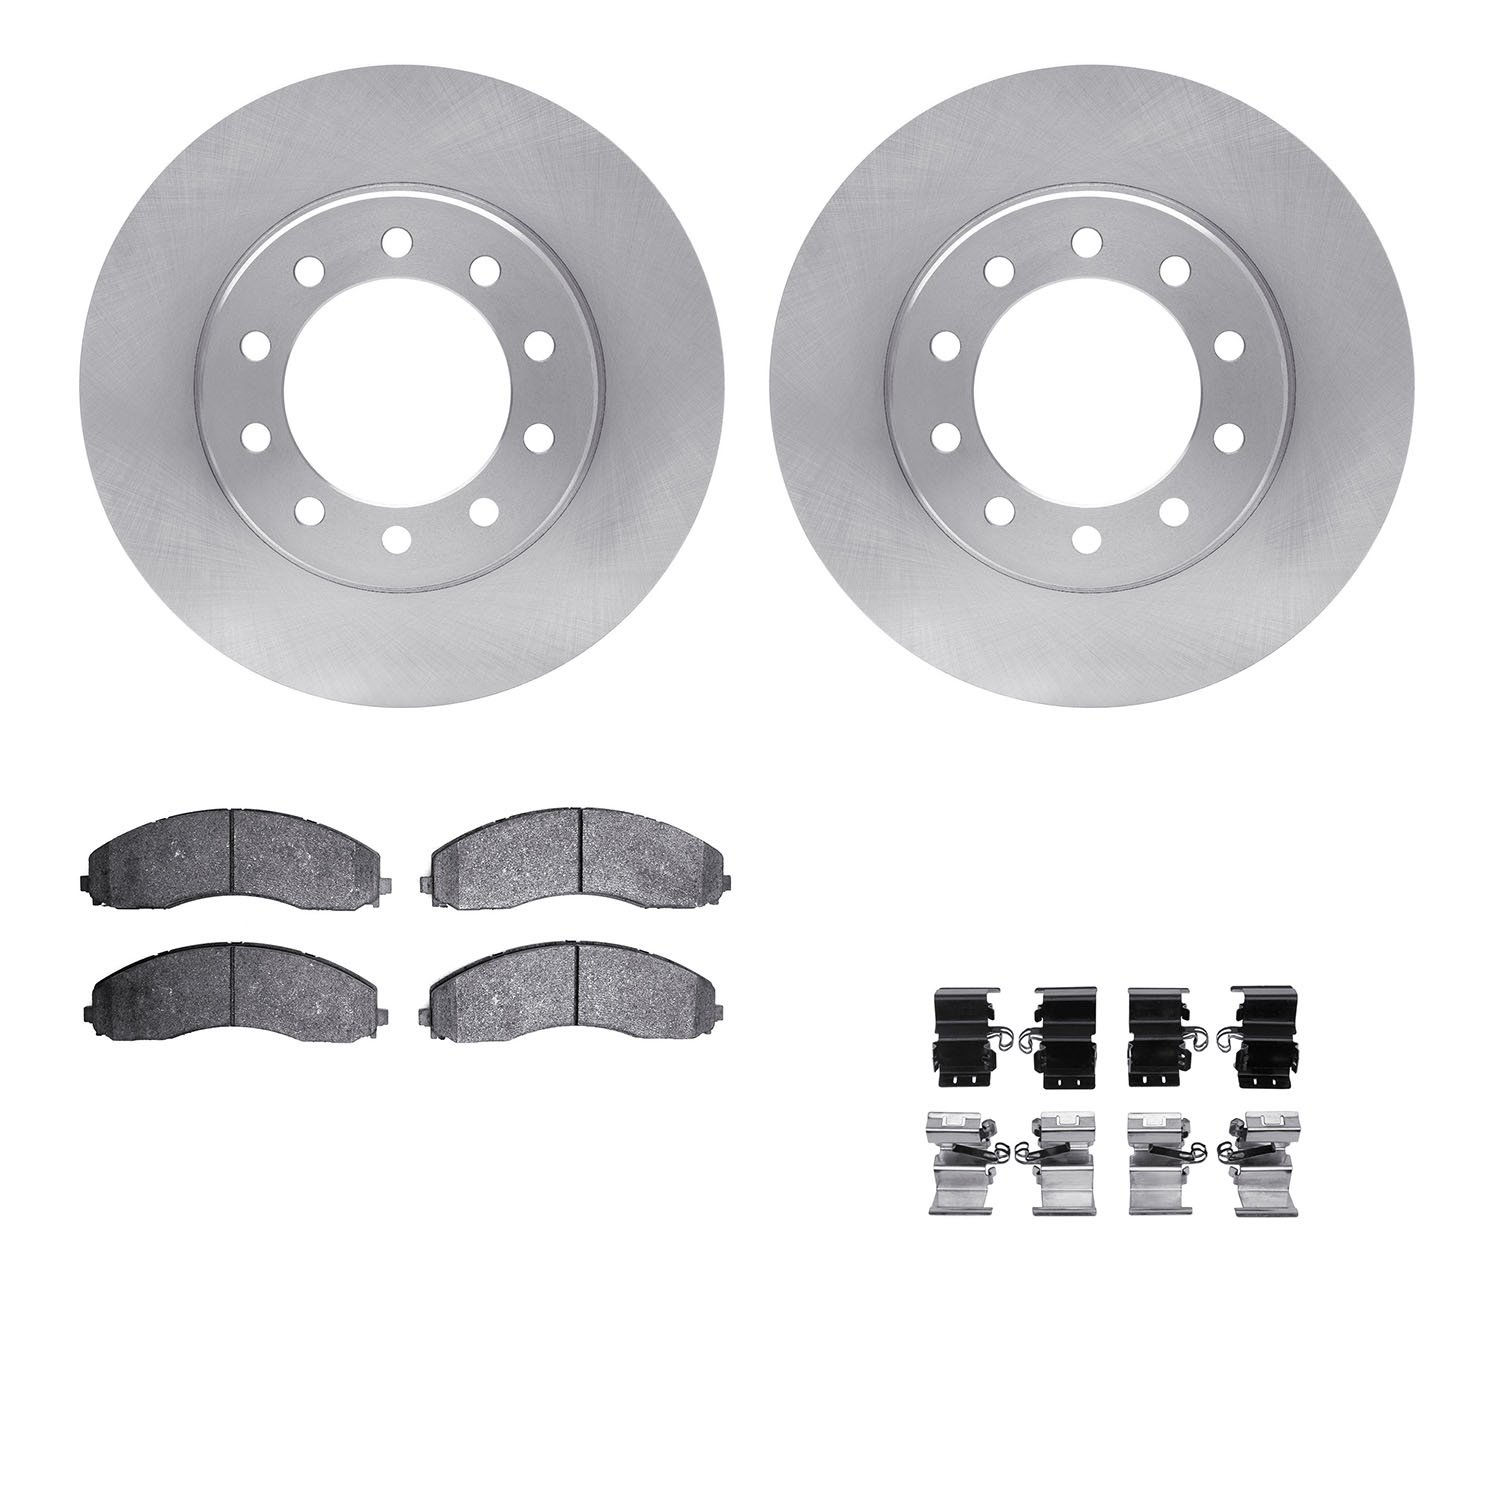 6412-54329 Brake Rotors with Ultimate-Duty Brake Pads Kit & Hardware, Fits Select Ford/Lincoln/Mercury/Mazda, Position: Front